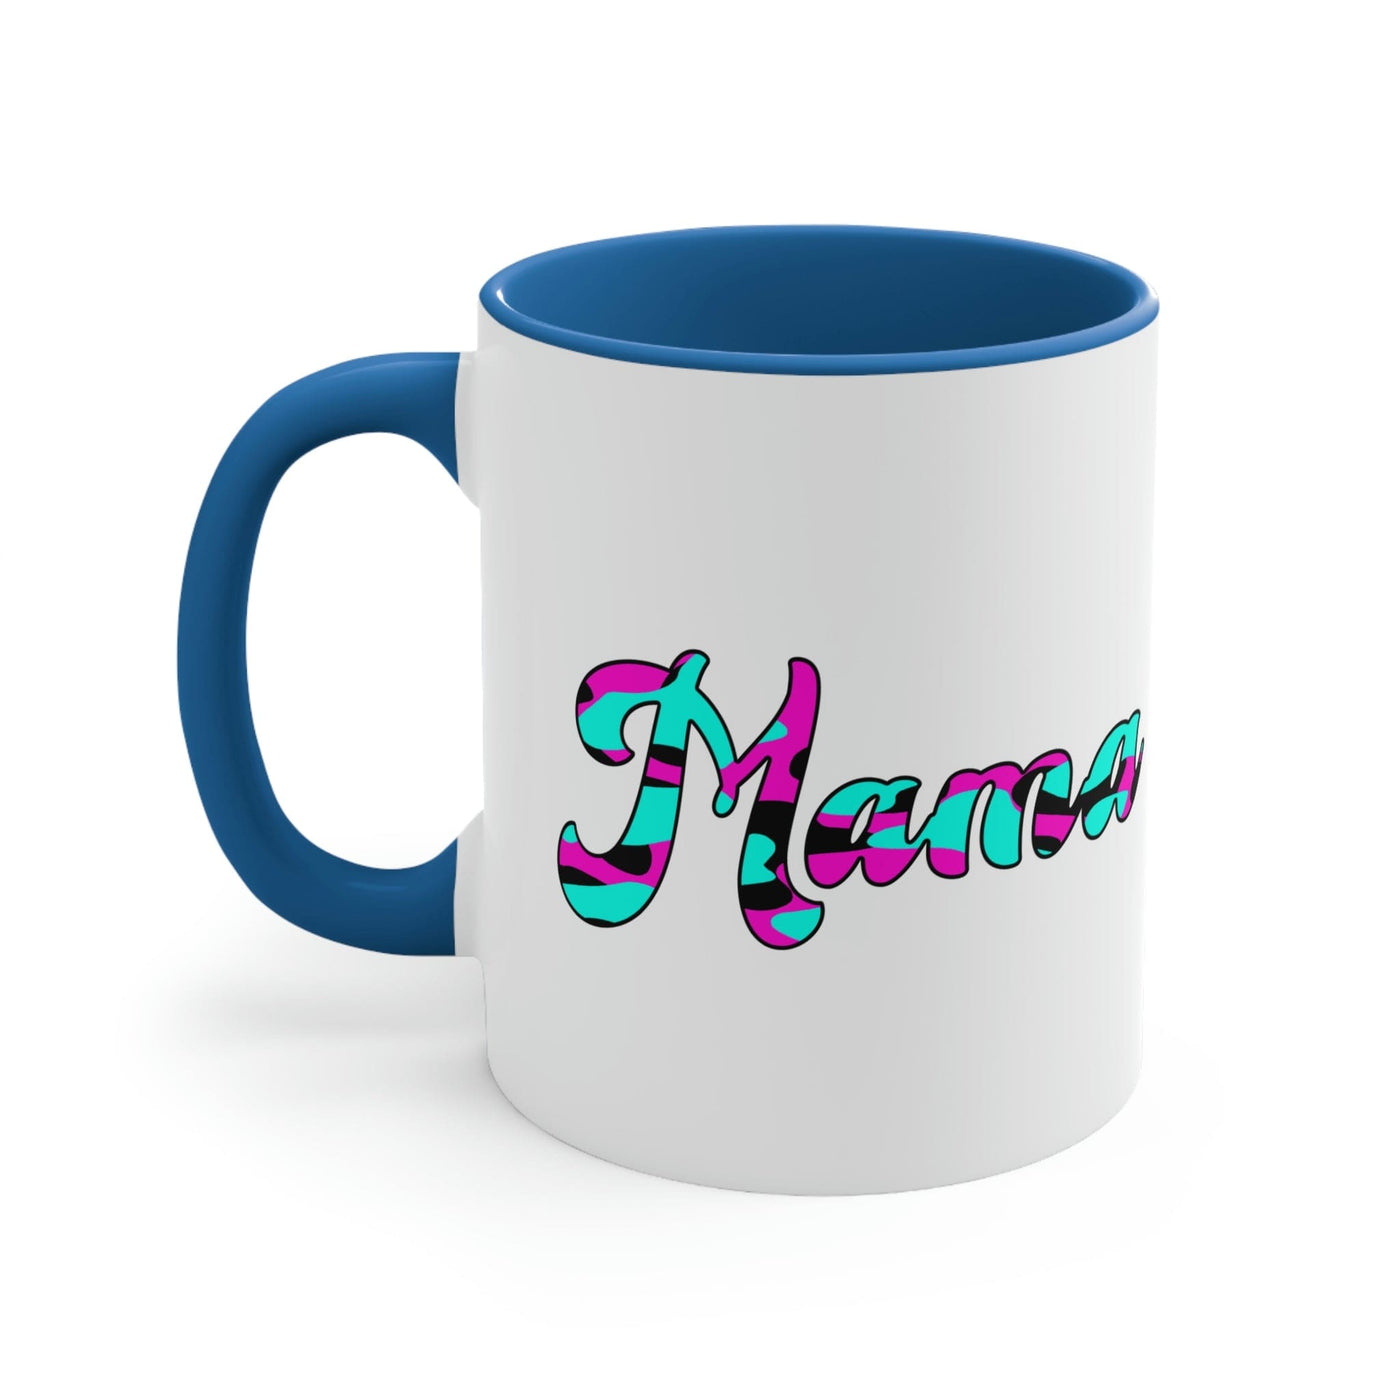 Two-tone Accent Ceramic Mug 11oz Pink White Blue Abstract Mama Illustration